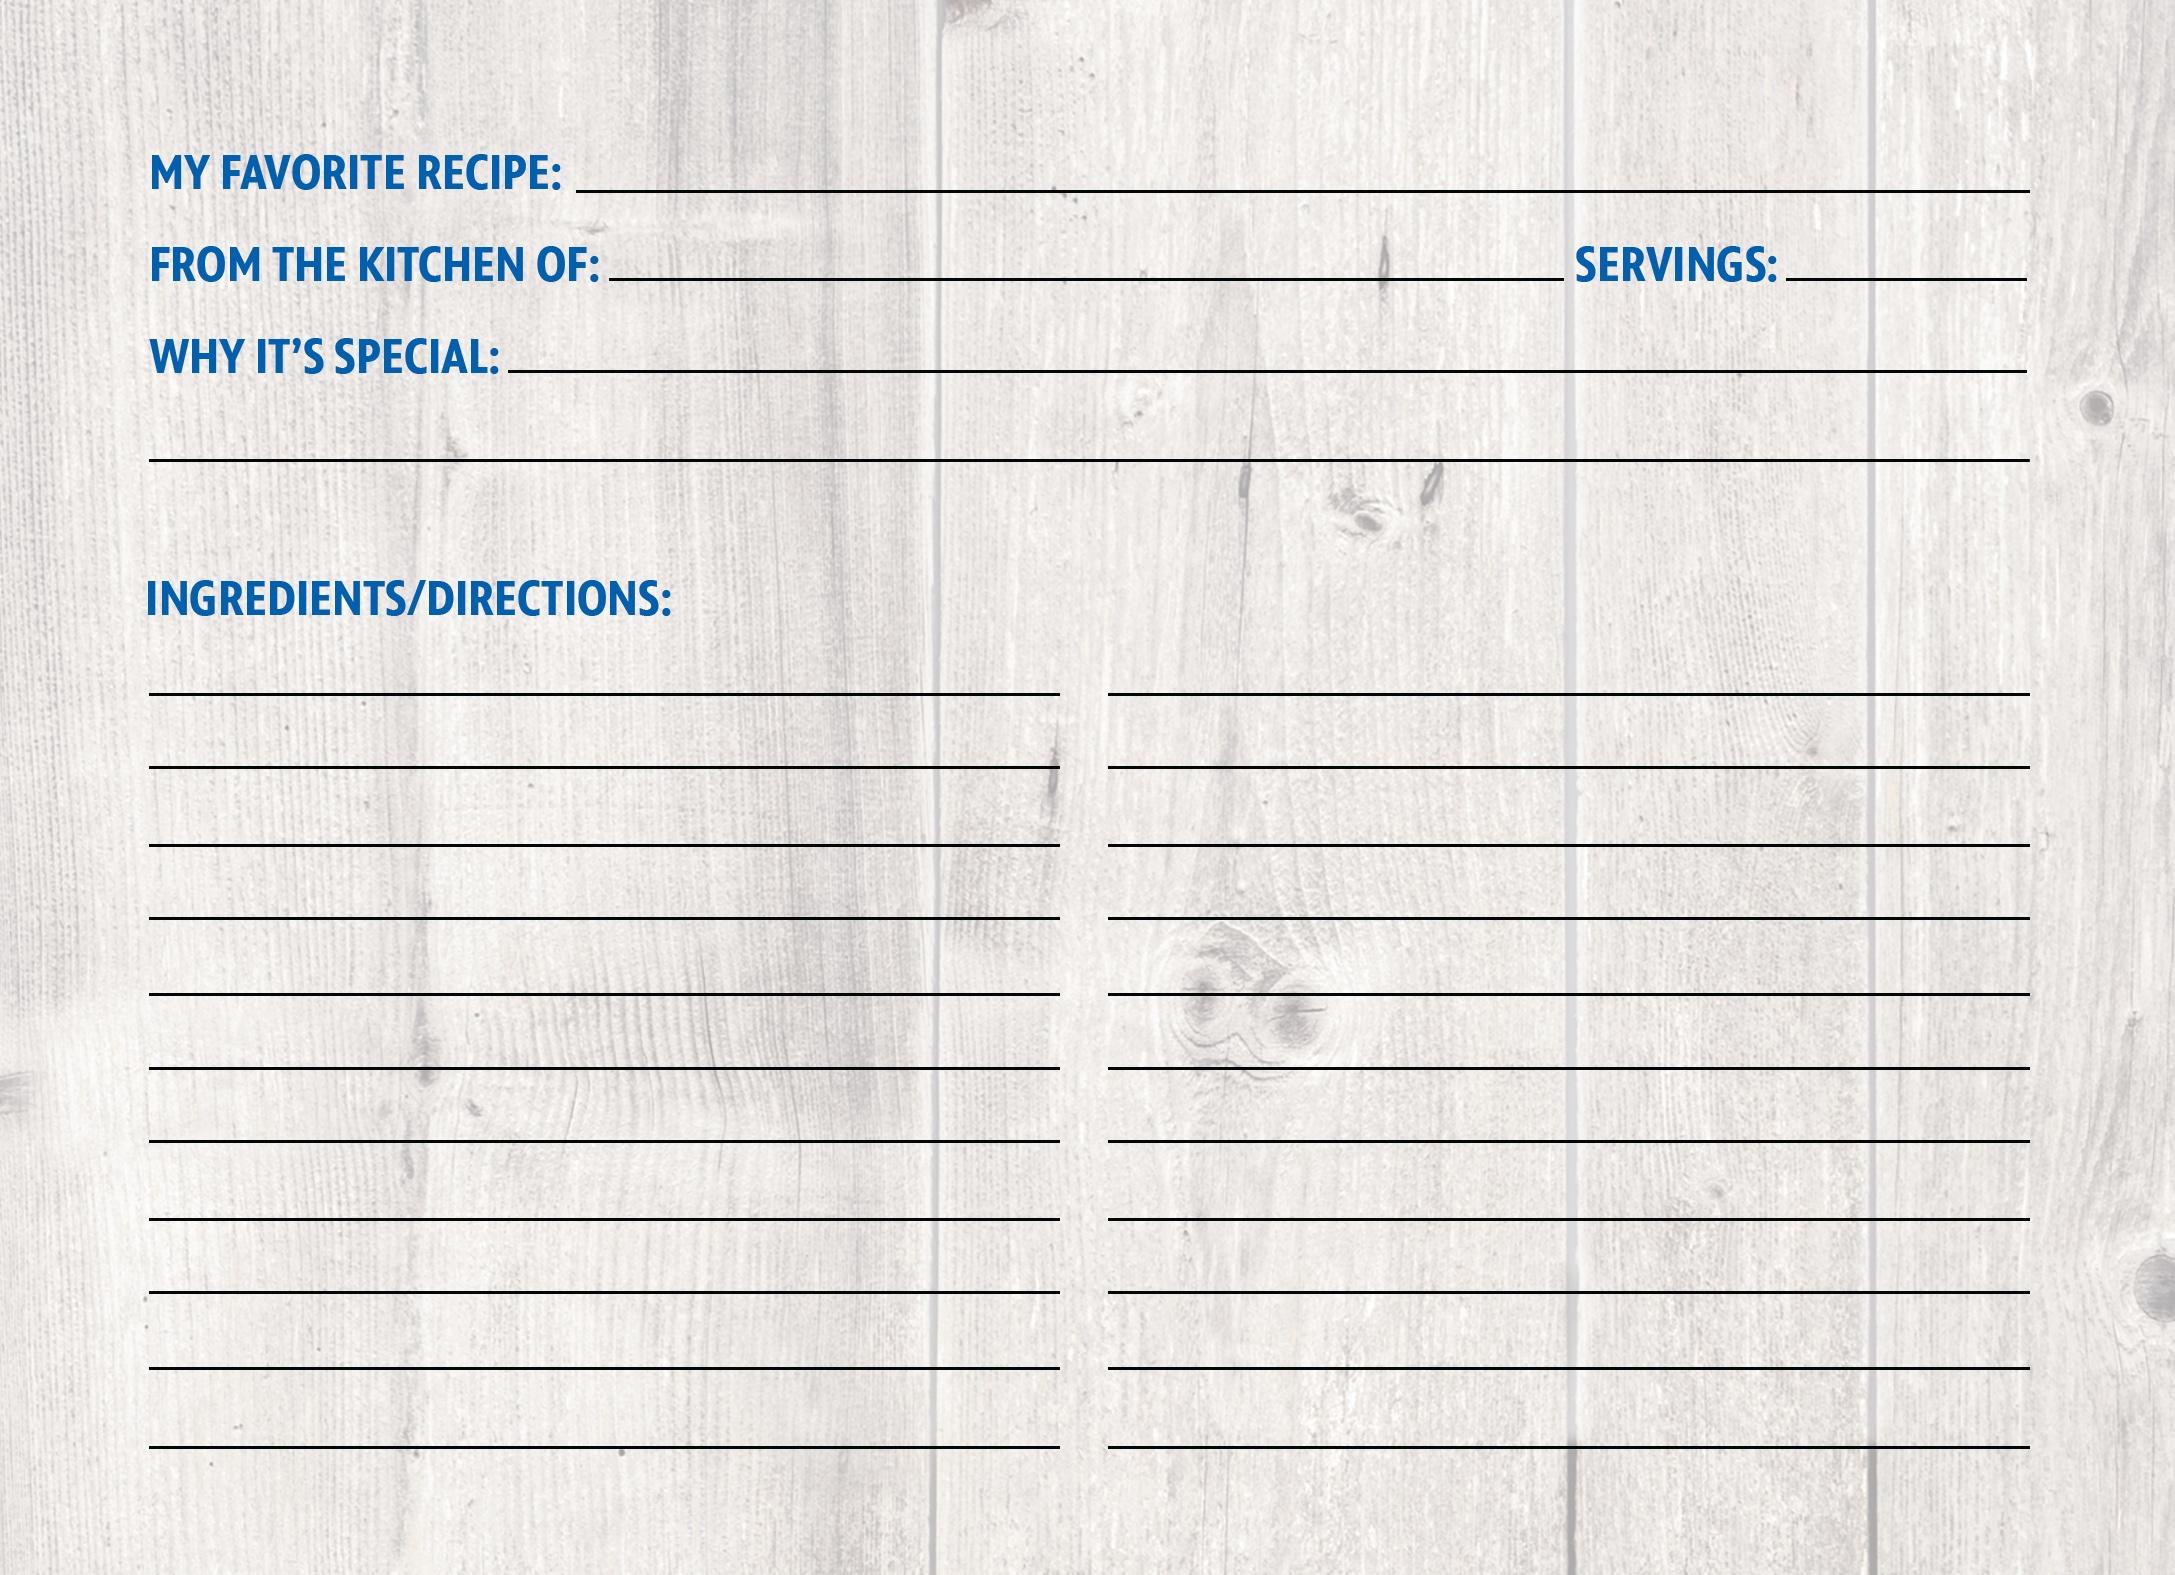 Blank recipe card to fill out